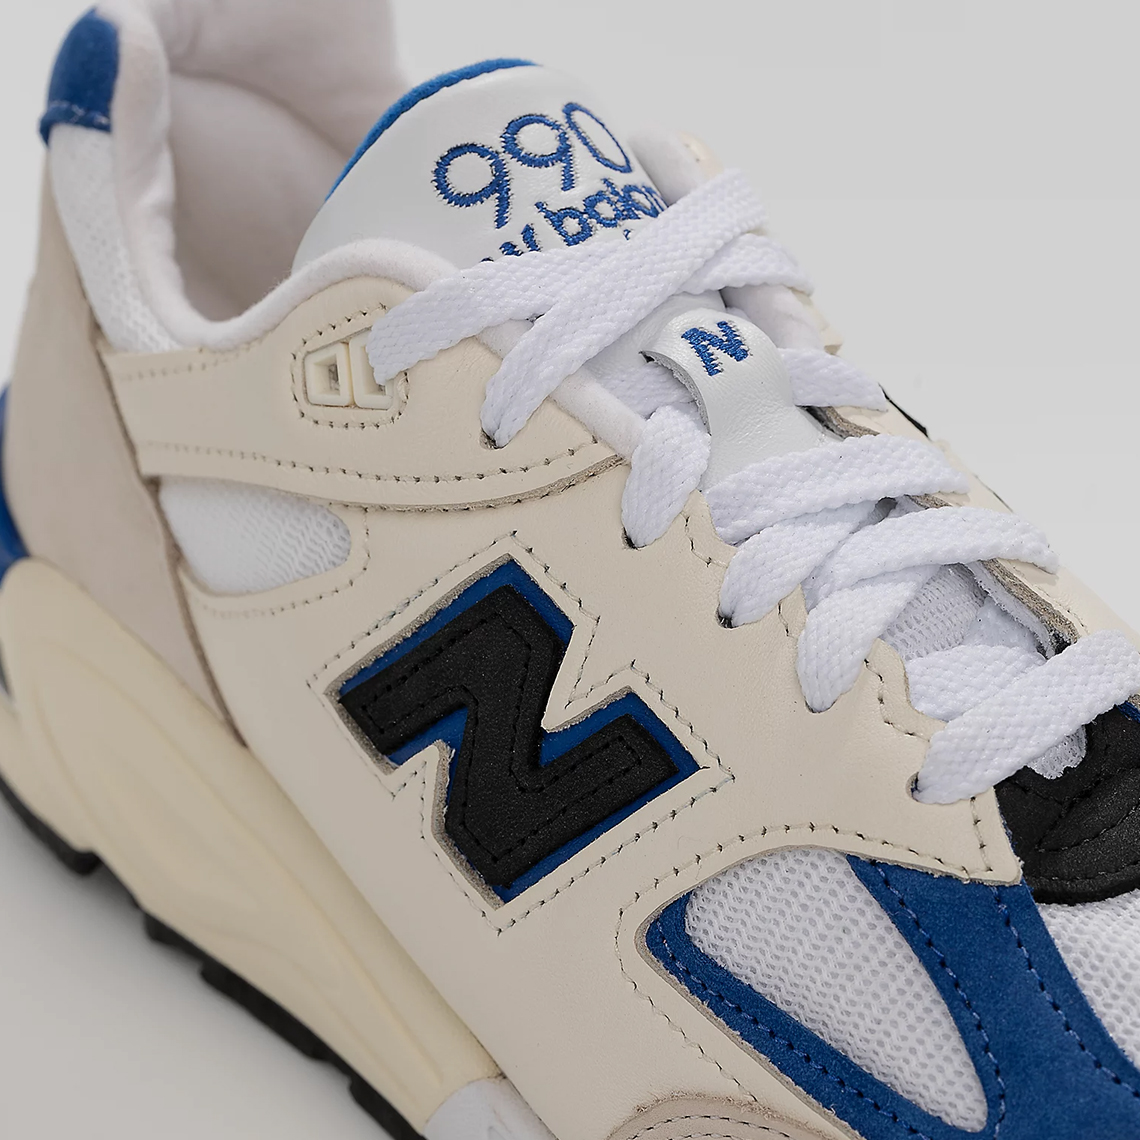 reigning champ new balance 530 first look Made In Usa White Blue M990wb2 5